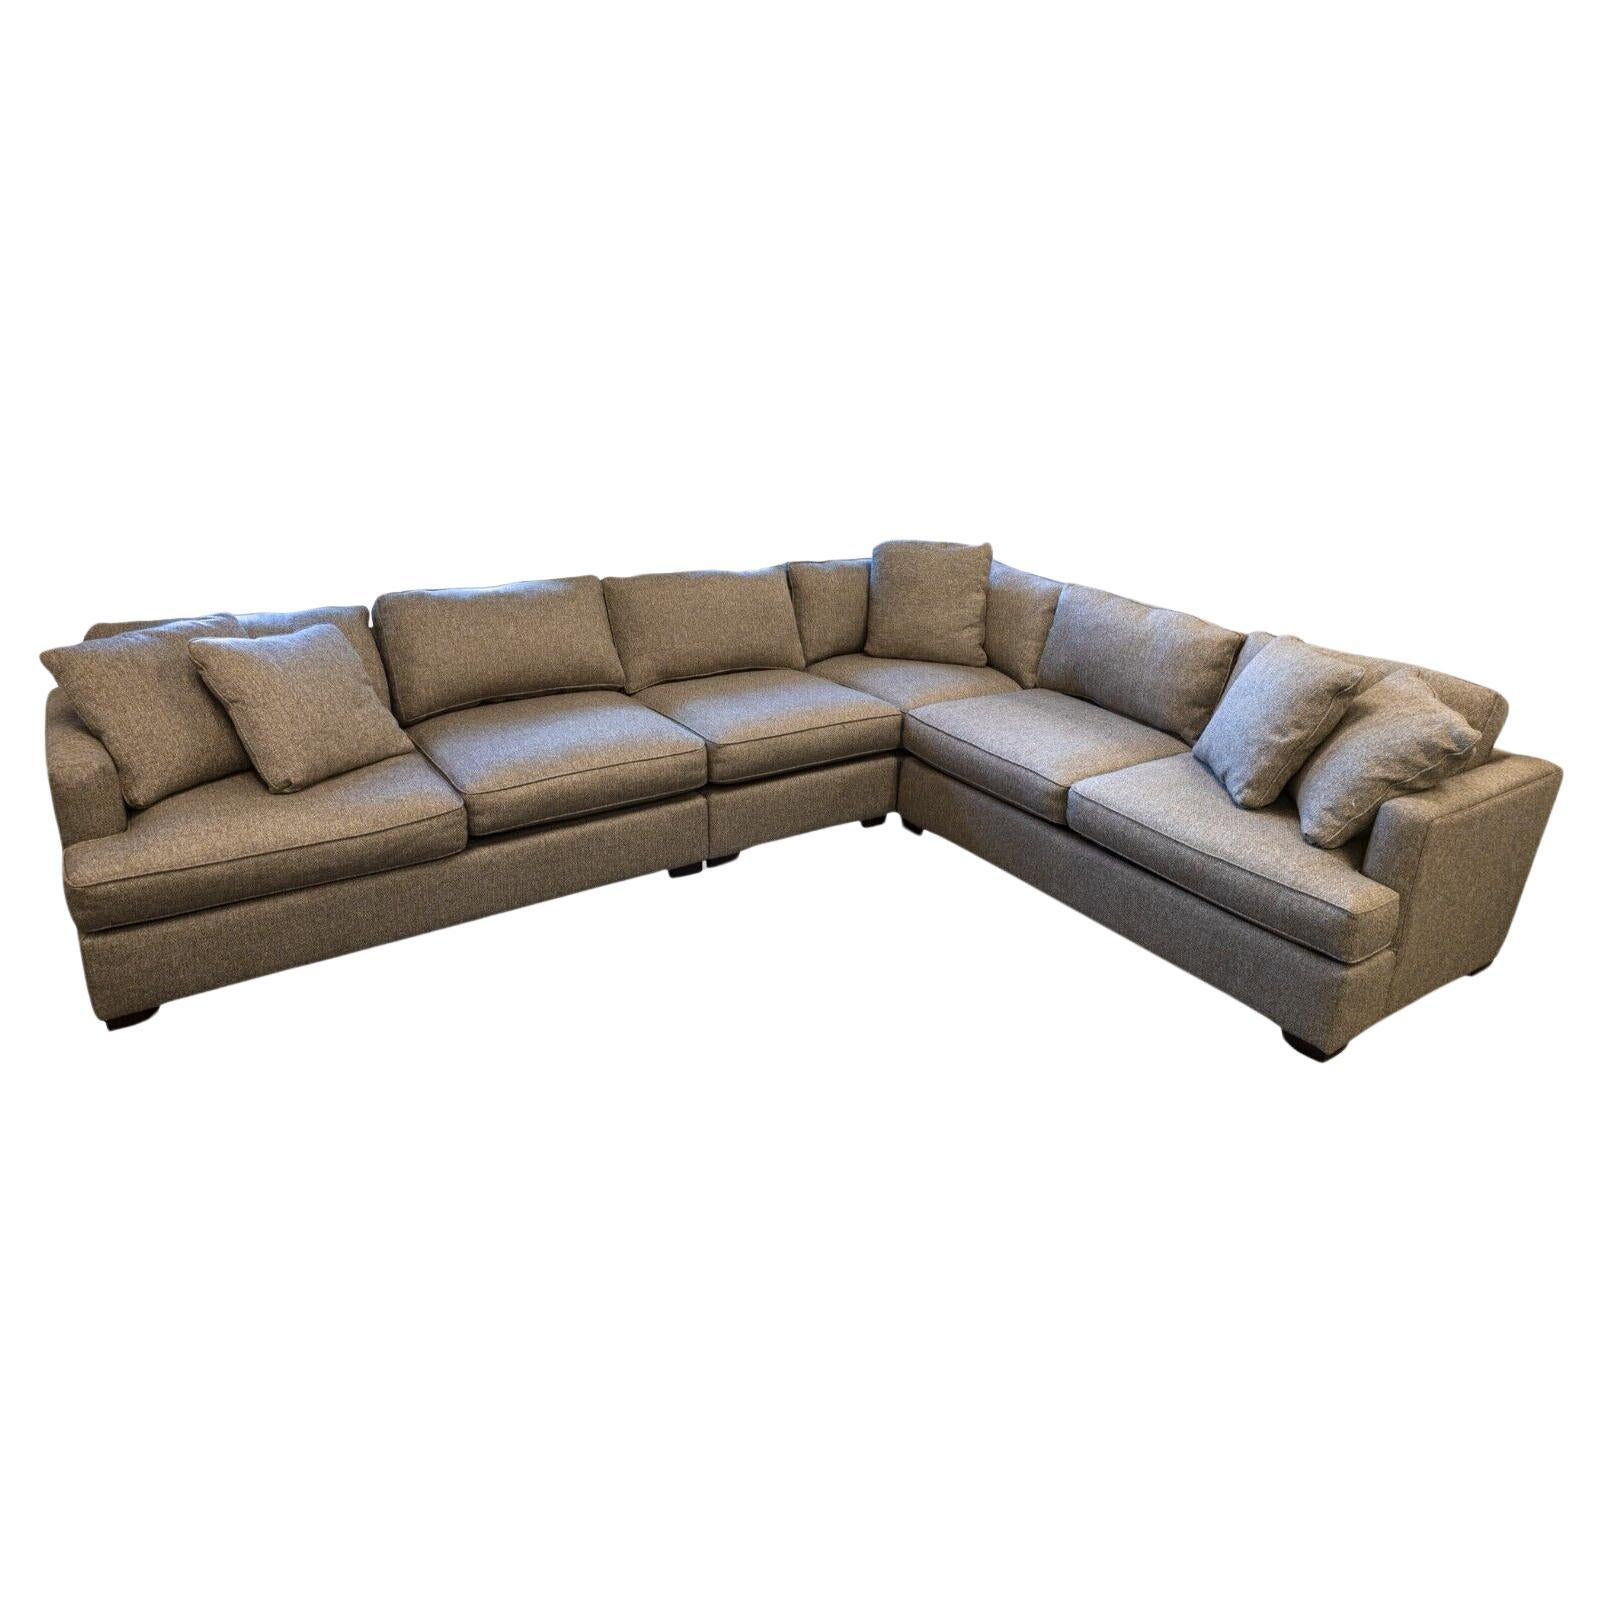 Contemporary Modern Large Grey L Shaped 3pc Sectional Sofa by Better By Design